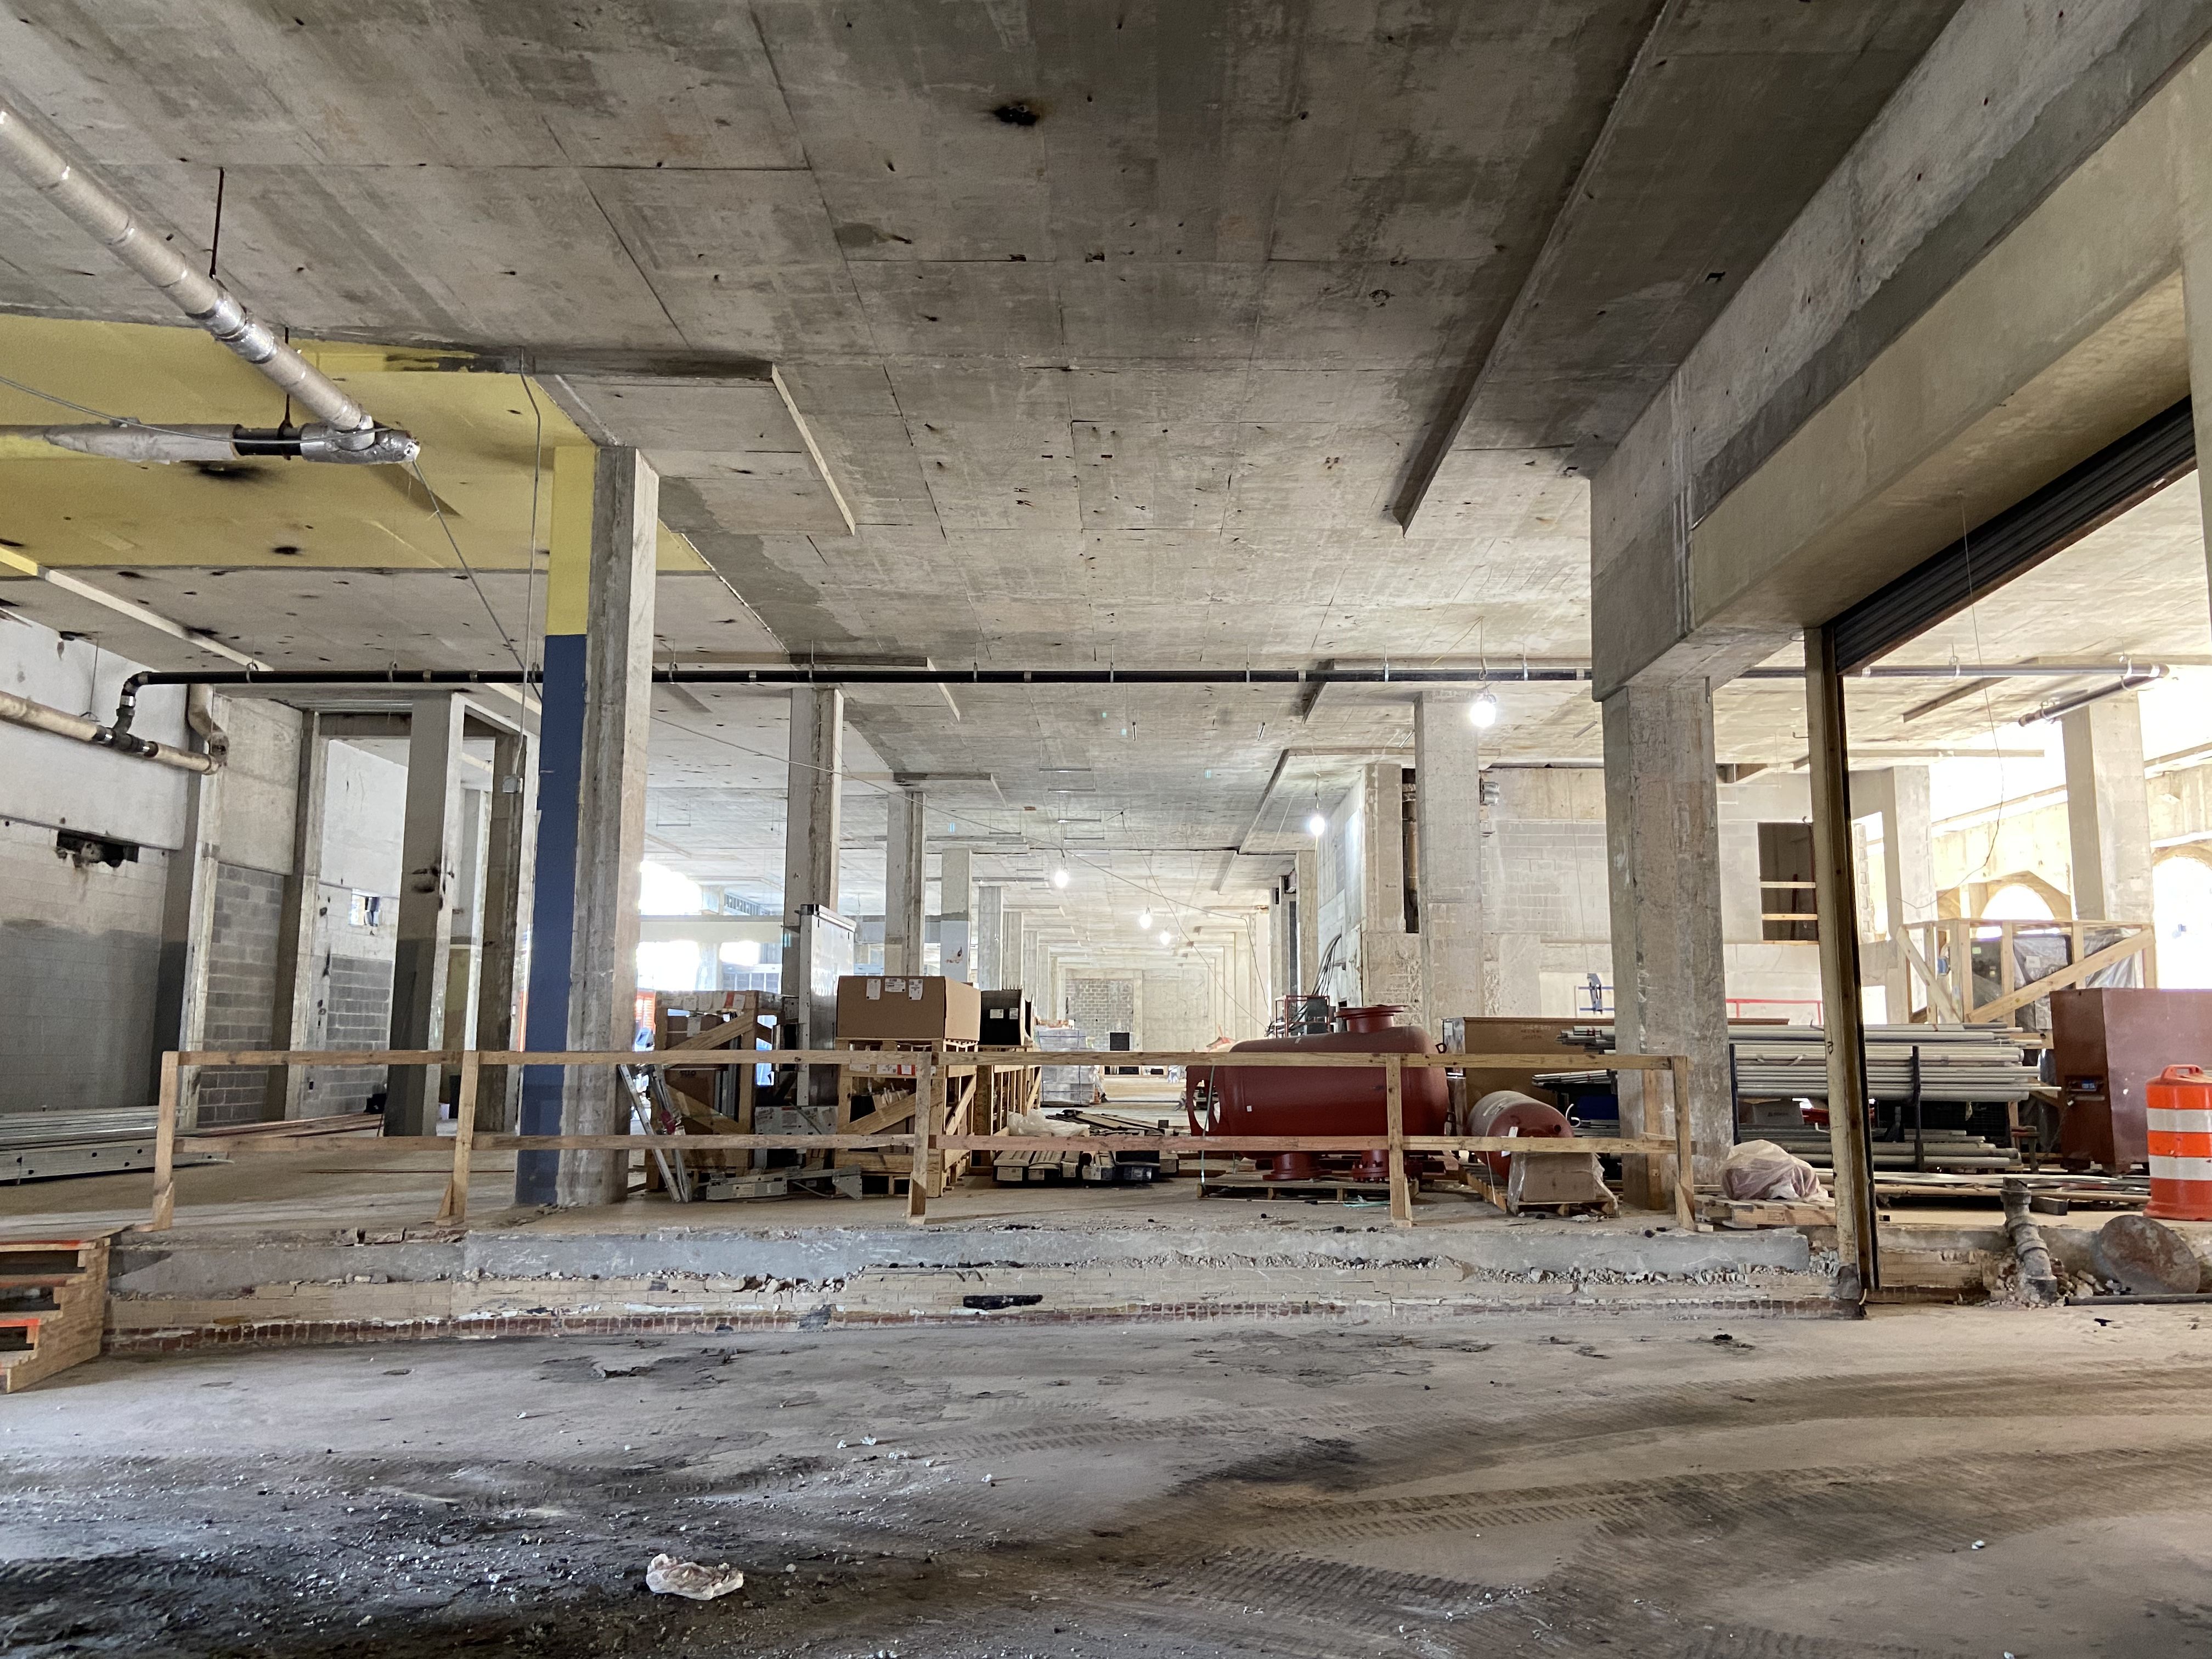 The interior of a building with high ceilings under construction with exposed concrete